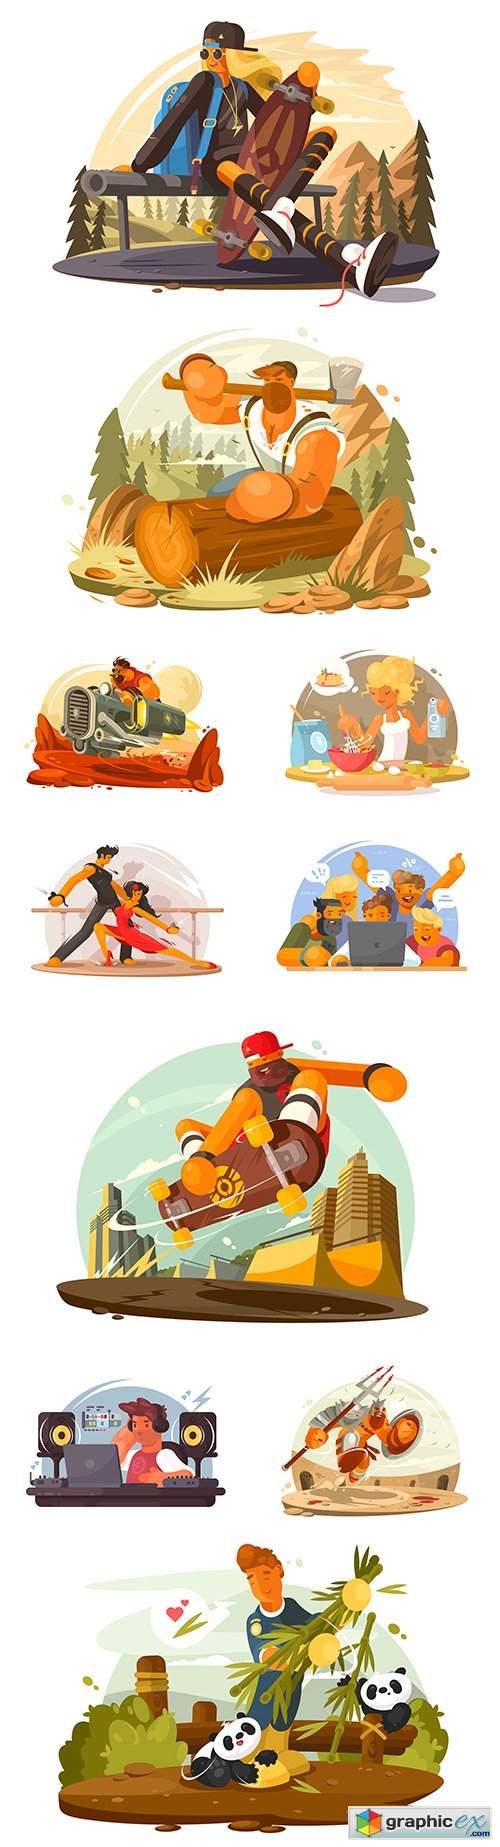  Different people at work and leisure modern design illustration 2 